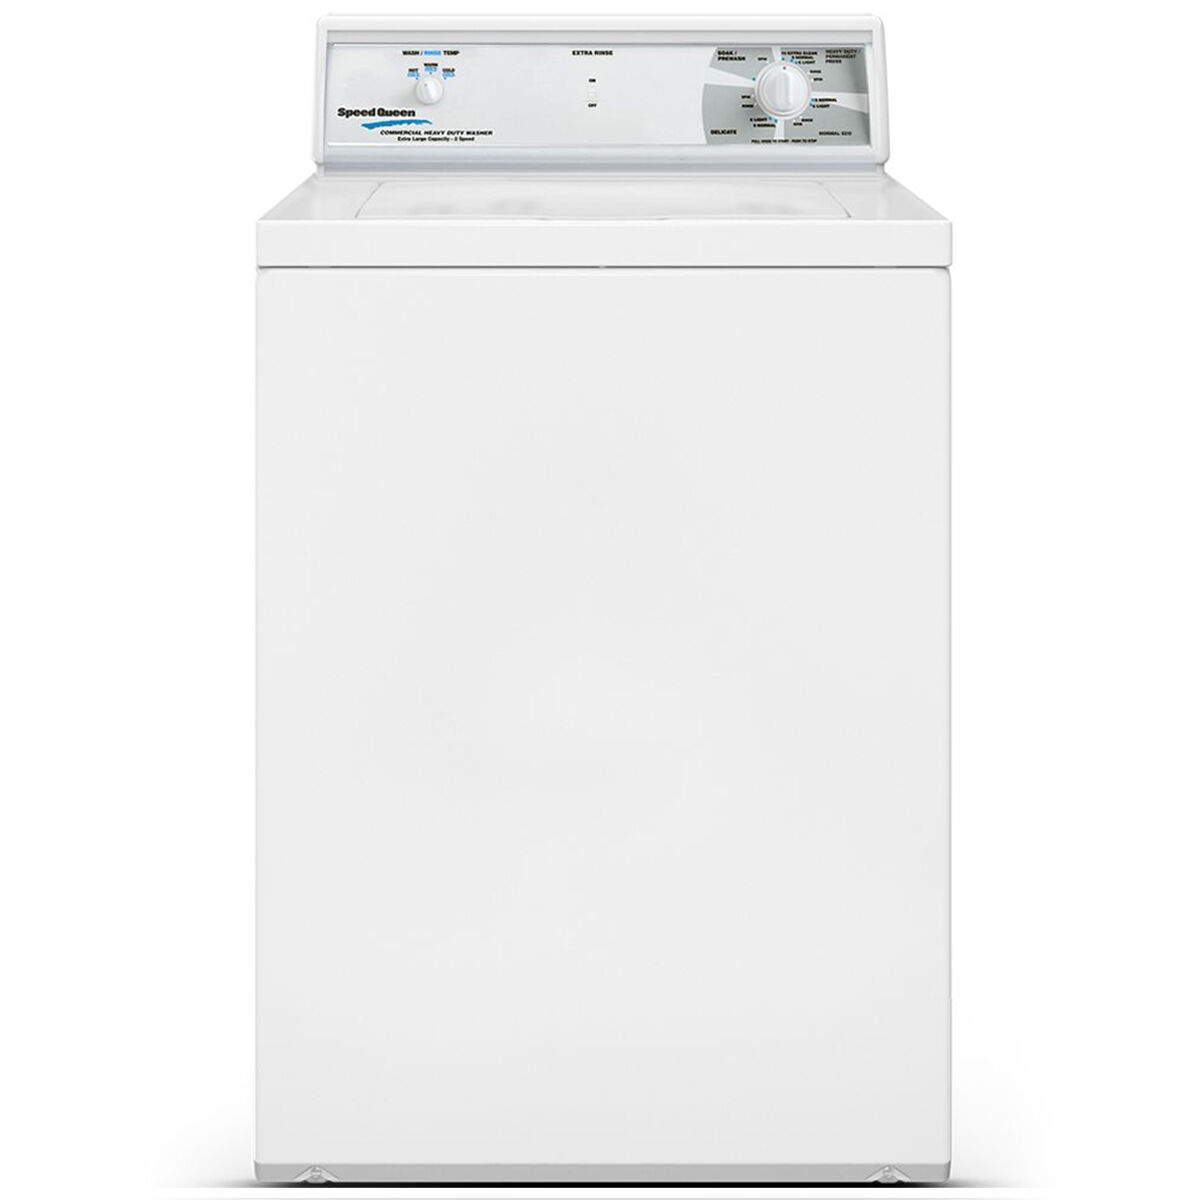 Speed Queen TV2 26 in. 3.1 cu. ft. Commercial Top Load Washer with Agitator  - White